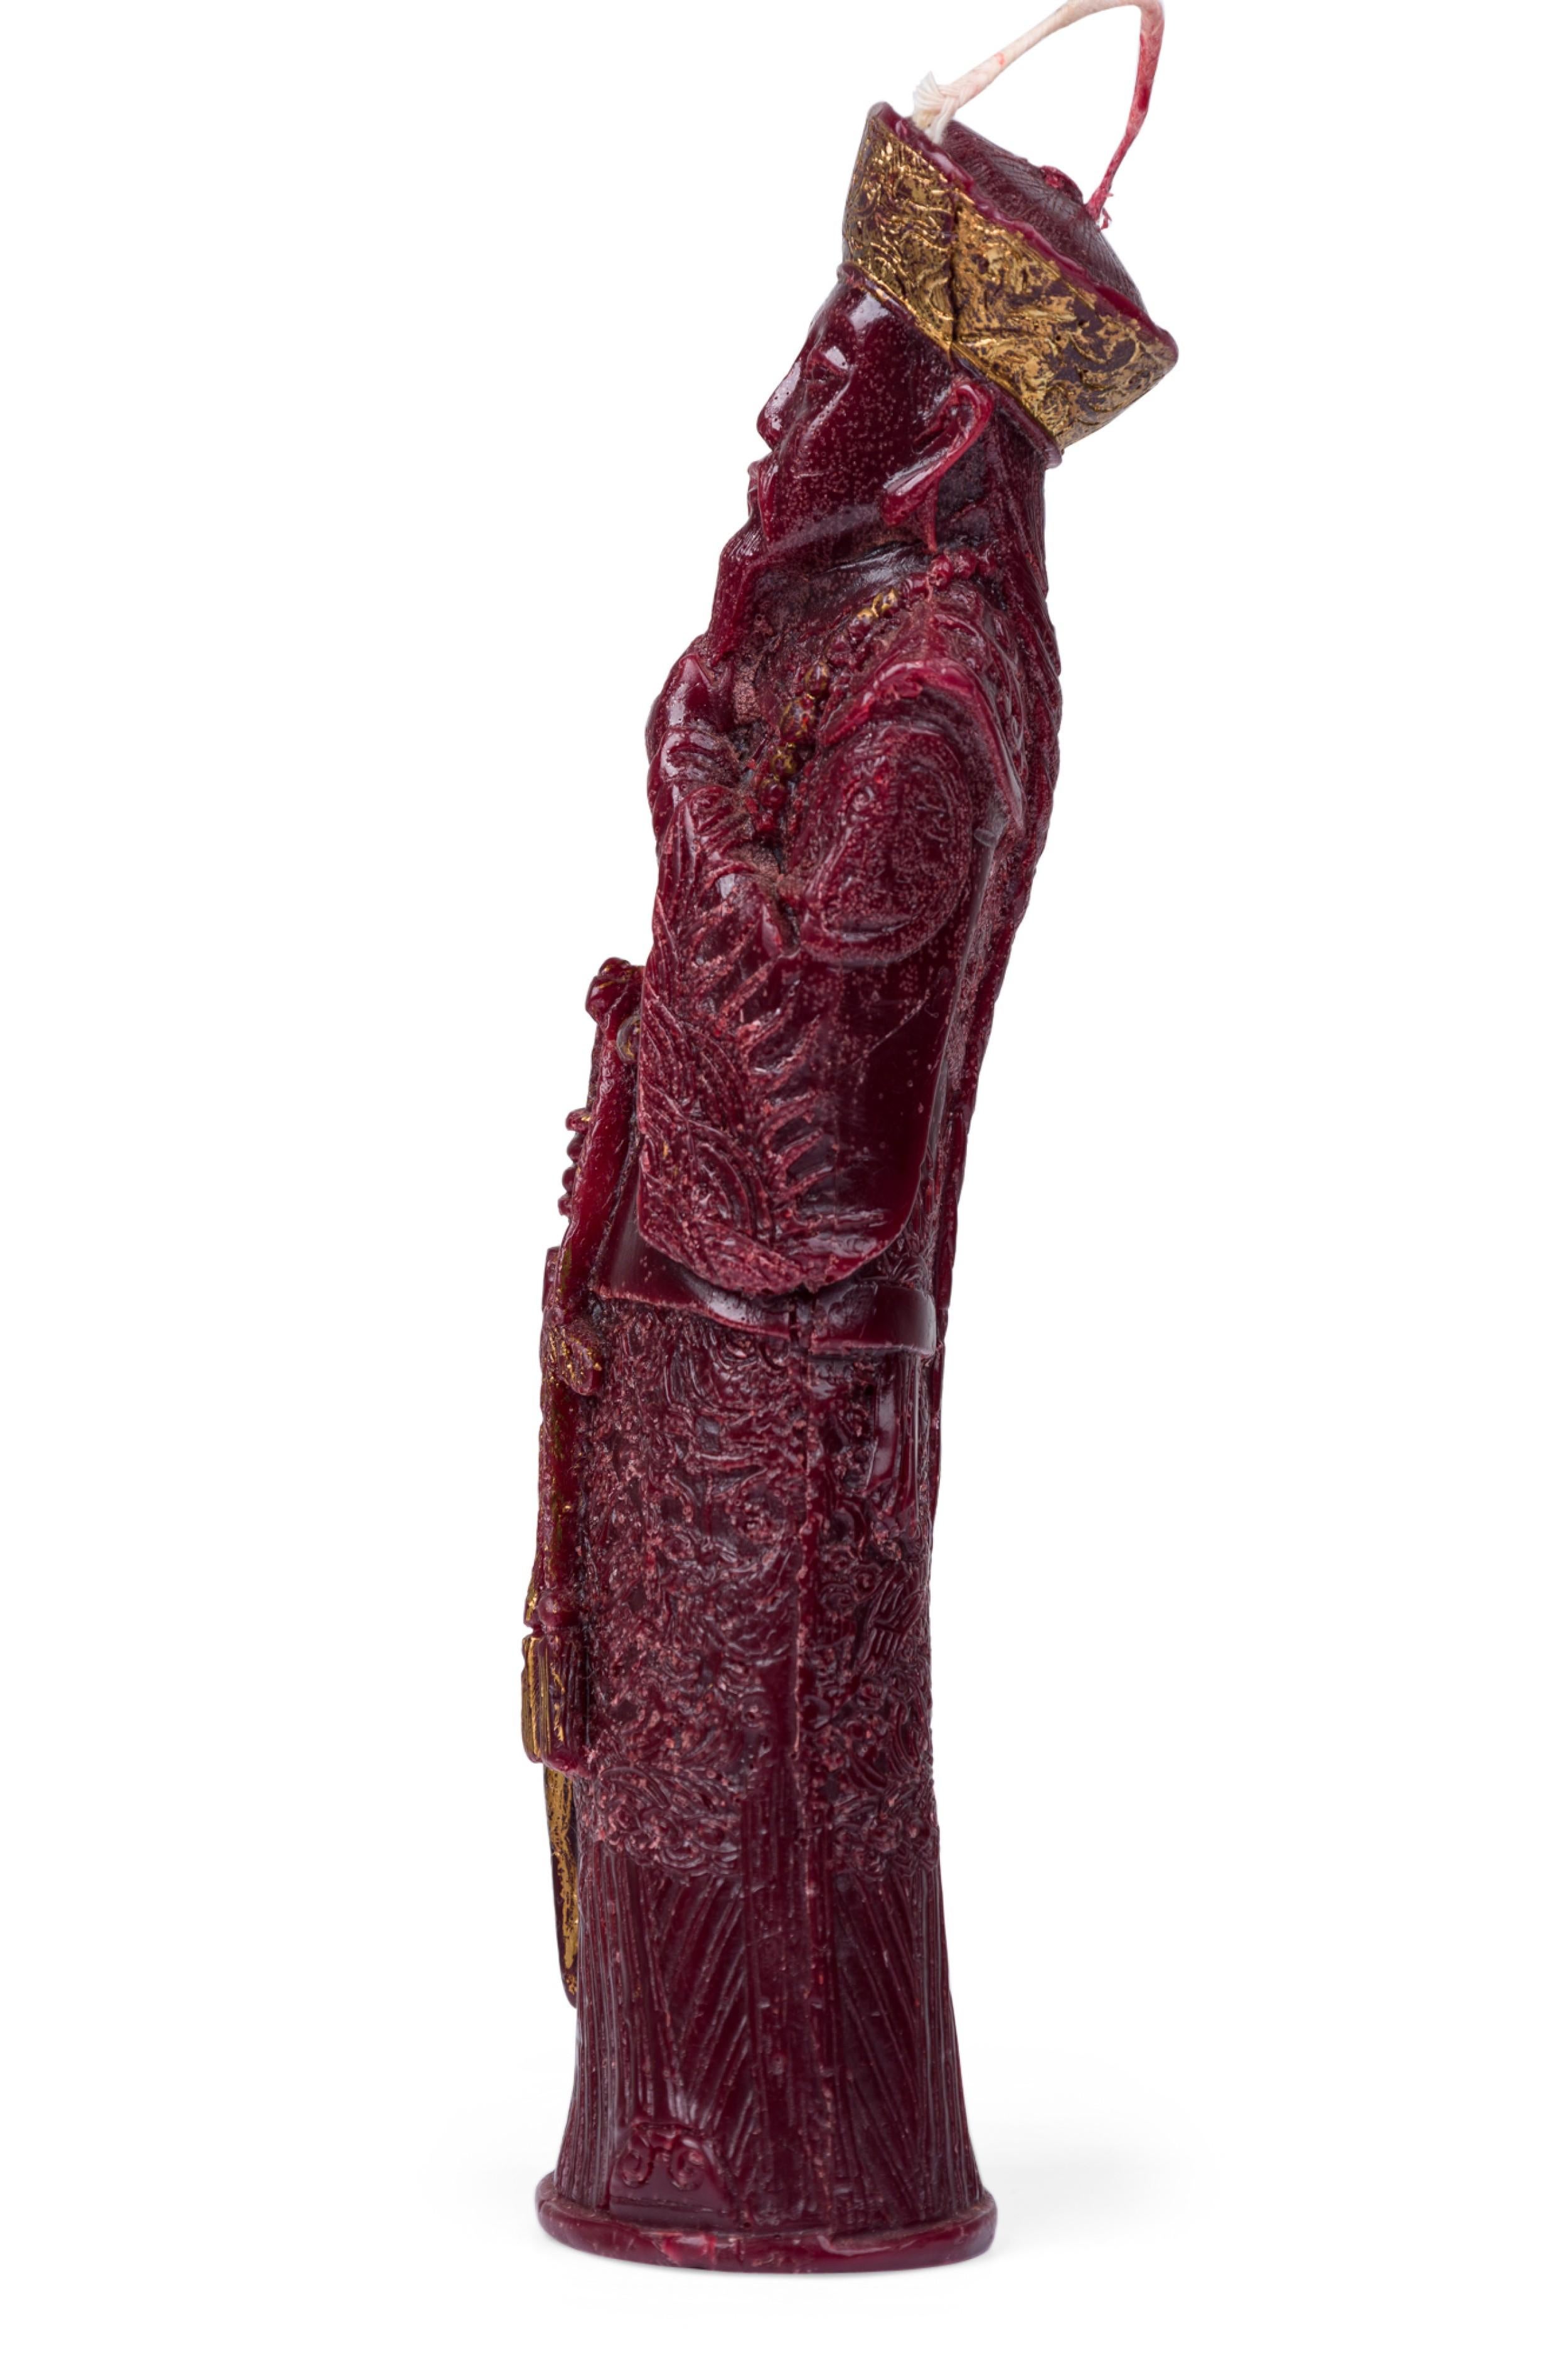 20th Century Chinese Wax Candle Figure Depicting an Emperor For Sale